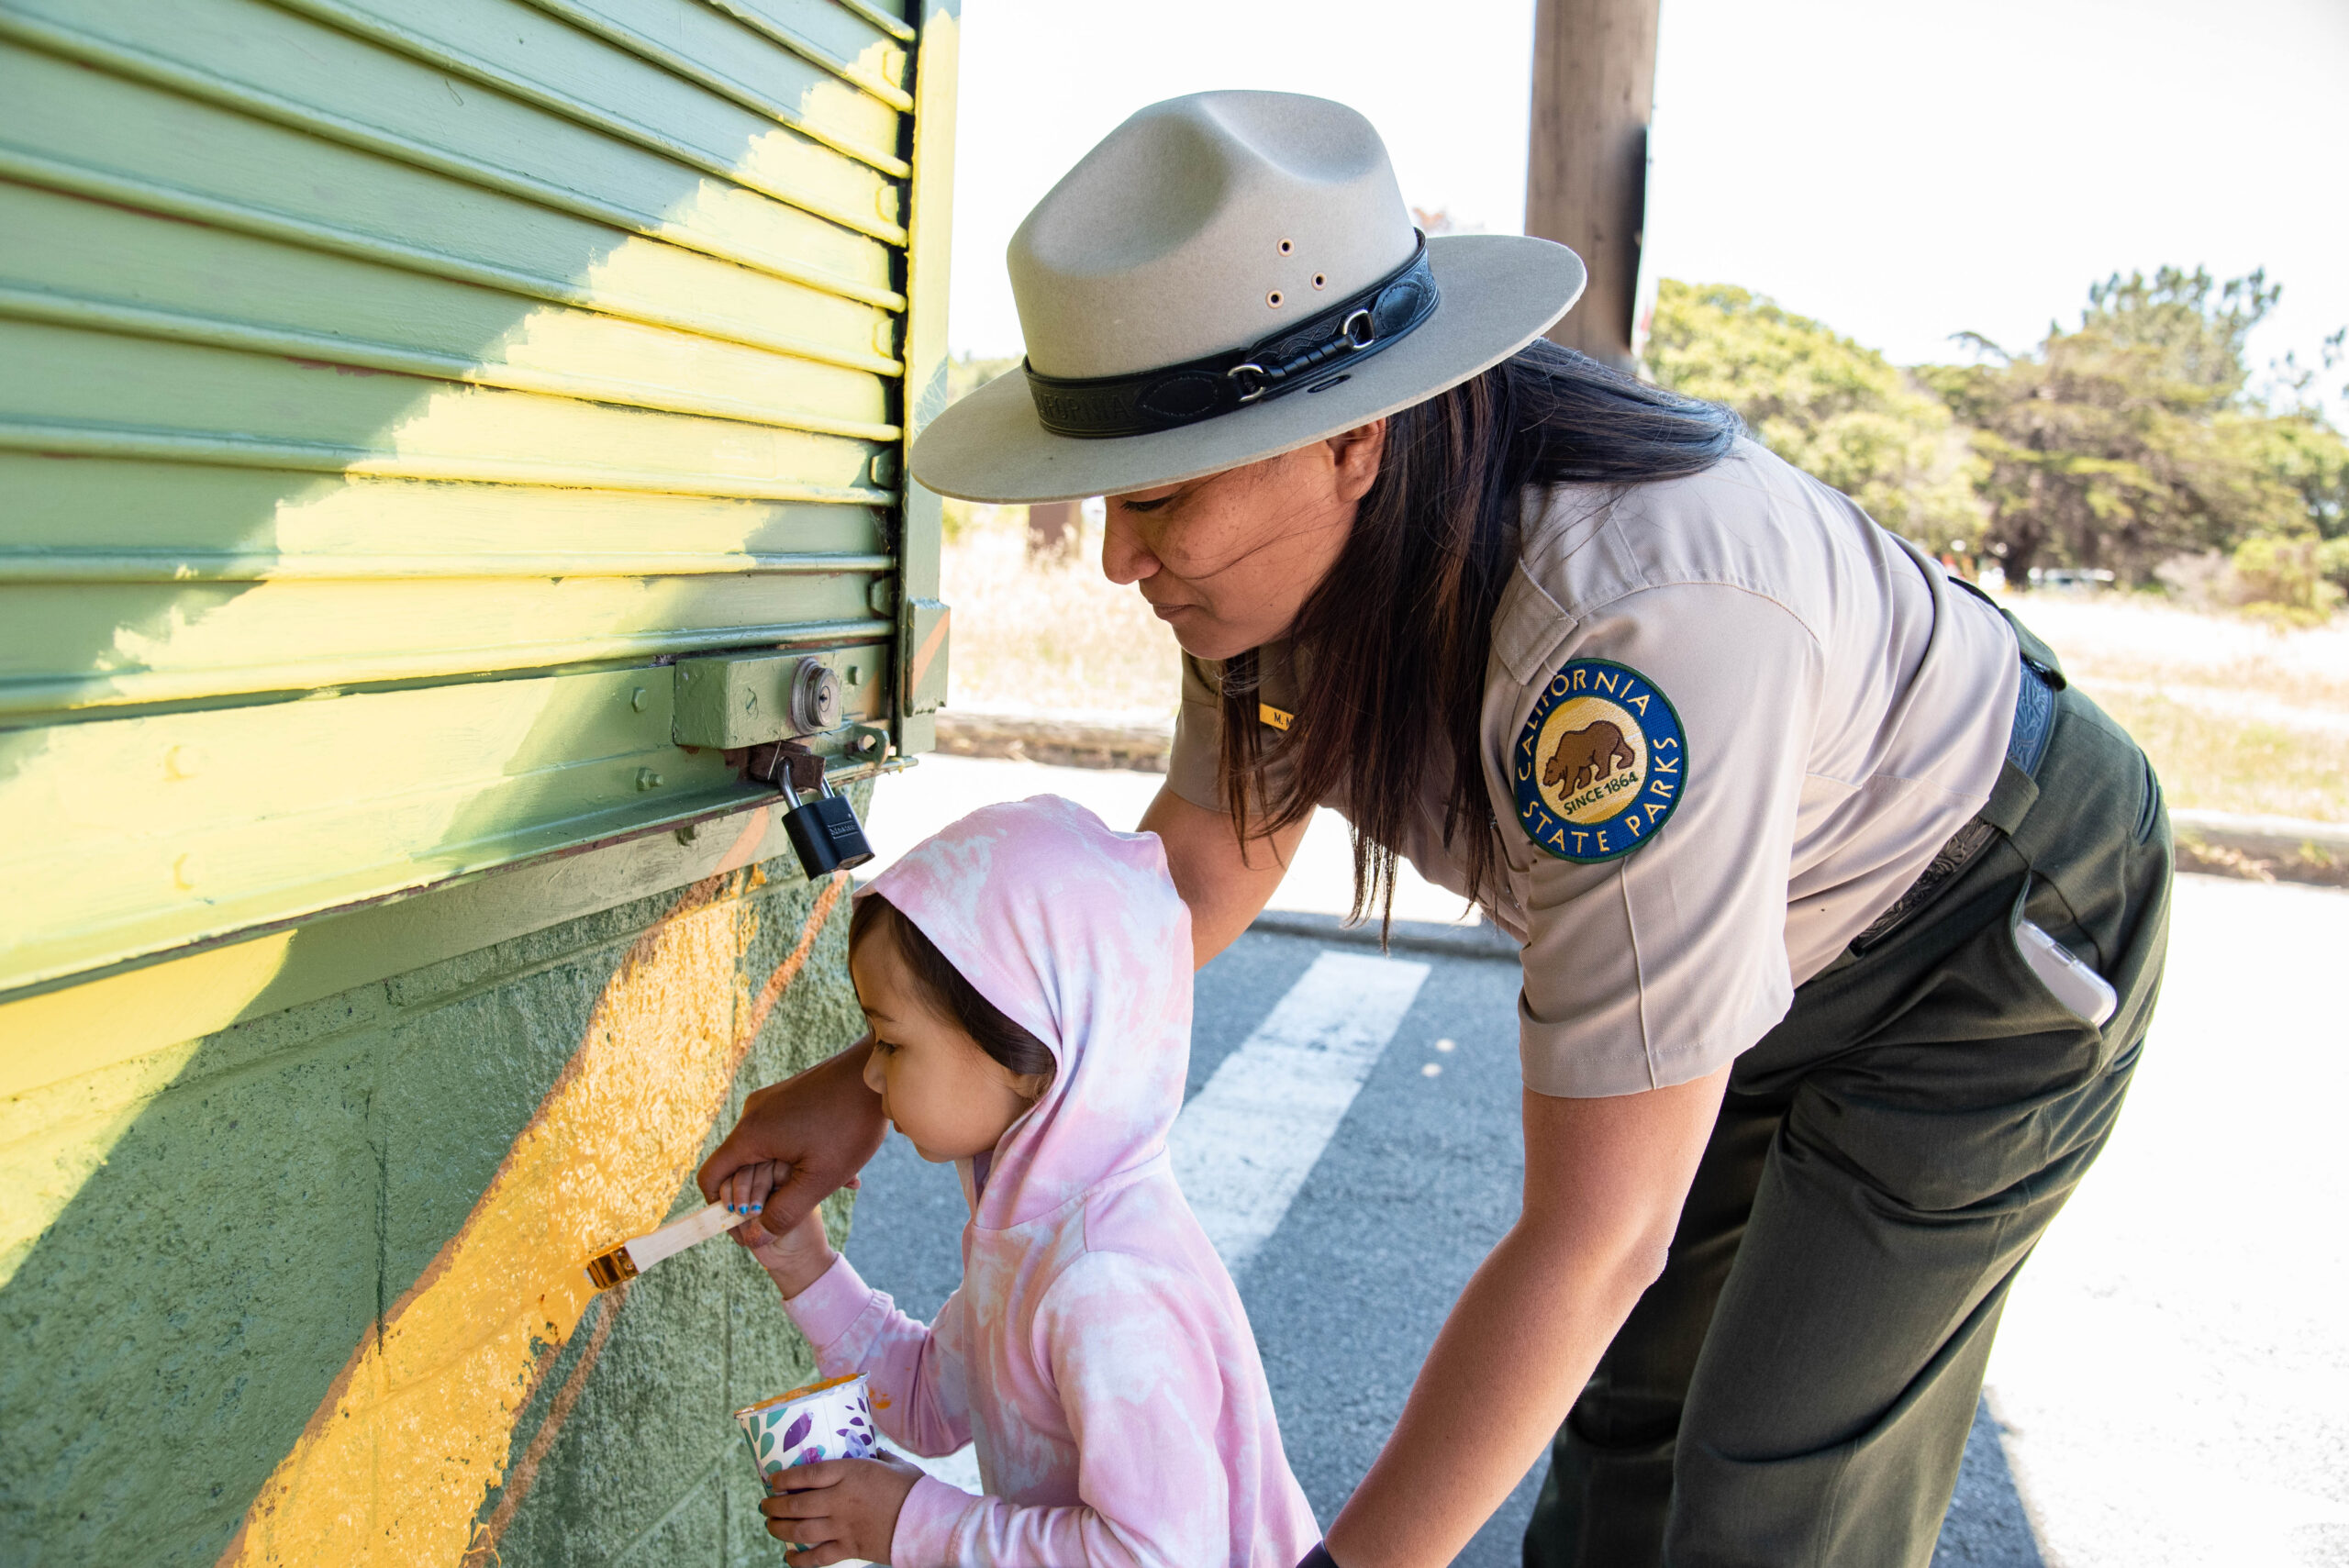 A park ranger in uniform with long dark hair bends down to help a small child in a pink hoodie carefully brush yellow paint along the side of a building as part of a mural. Several stripes of other muted earthy colors already adorn the concrete and plastic siding, looking like bright streaks of sunshine.